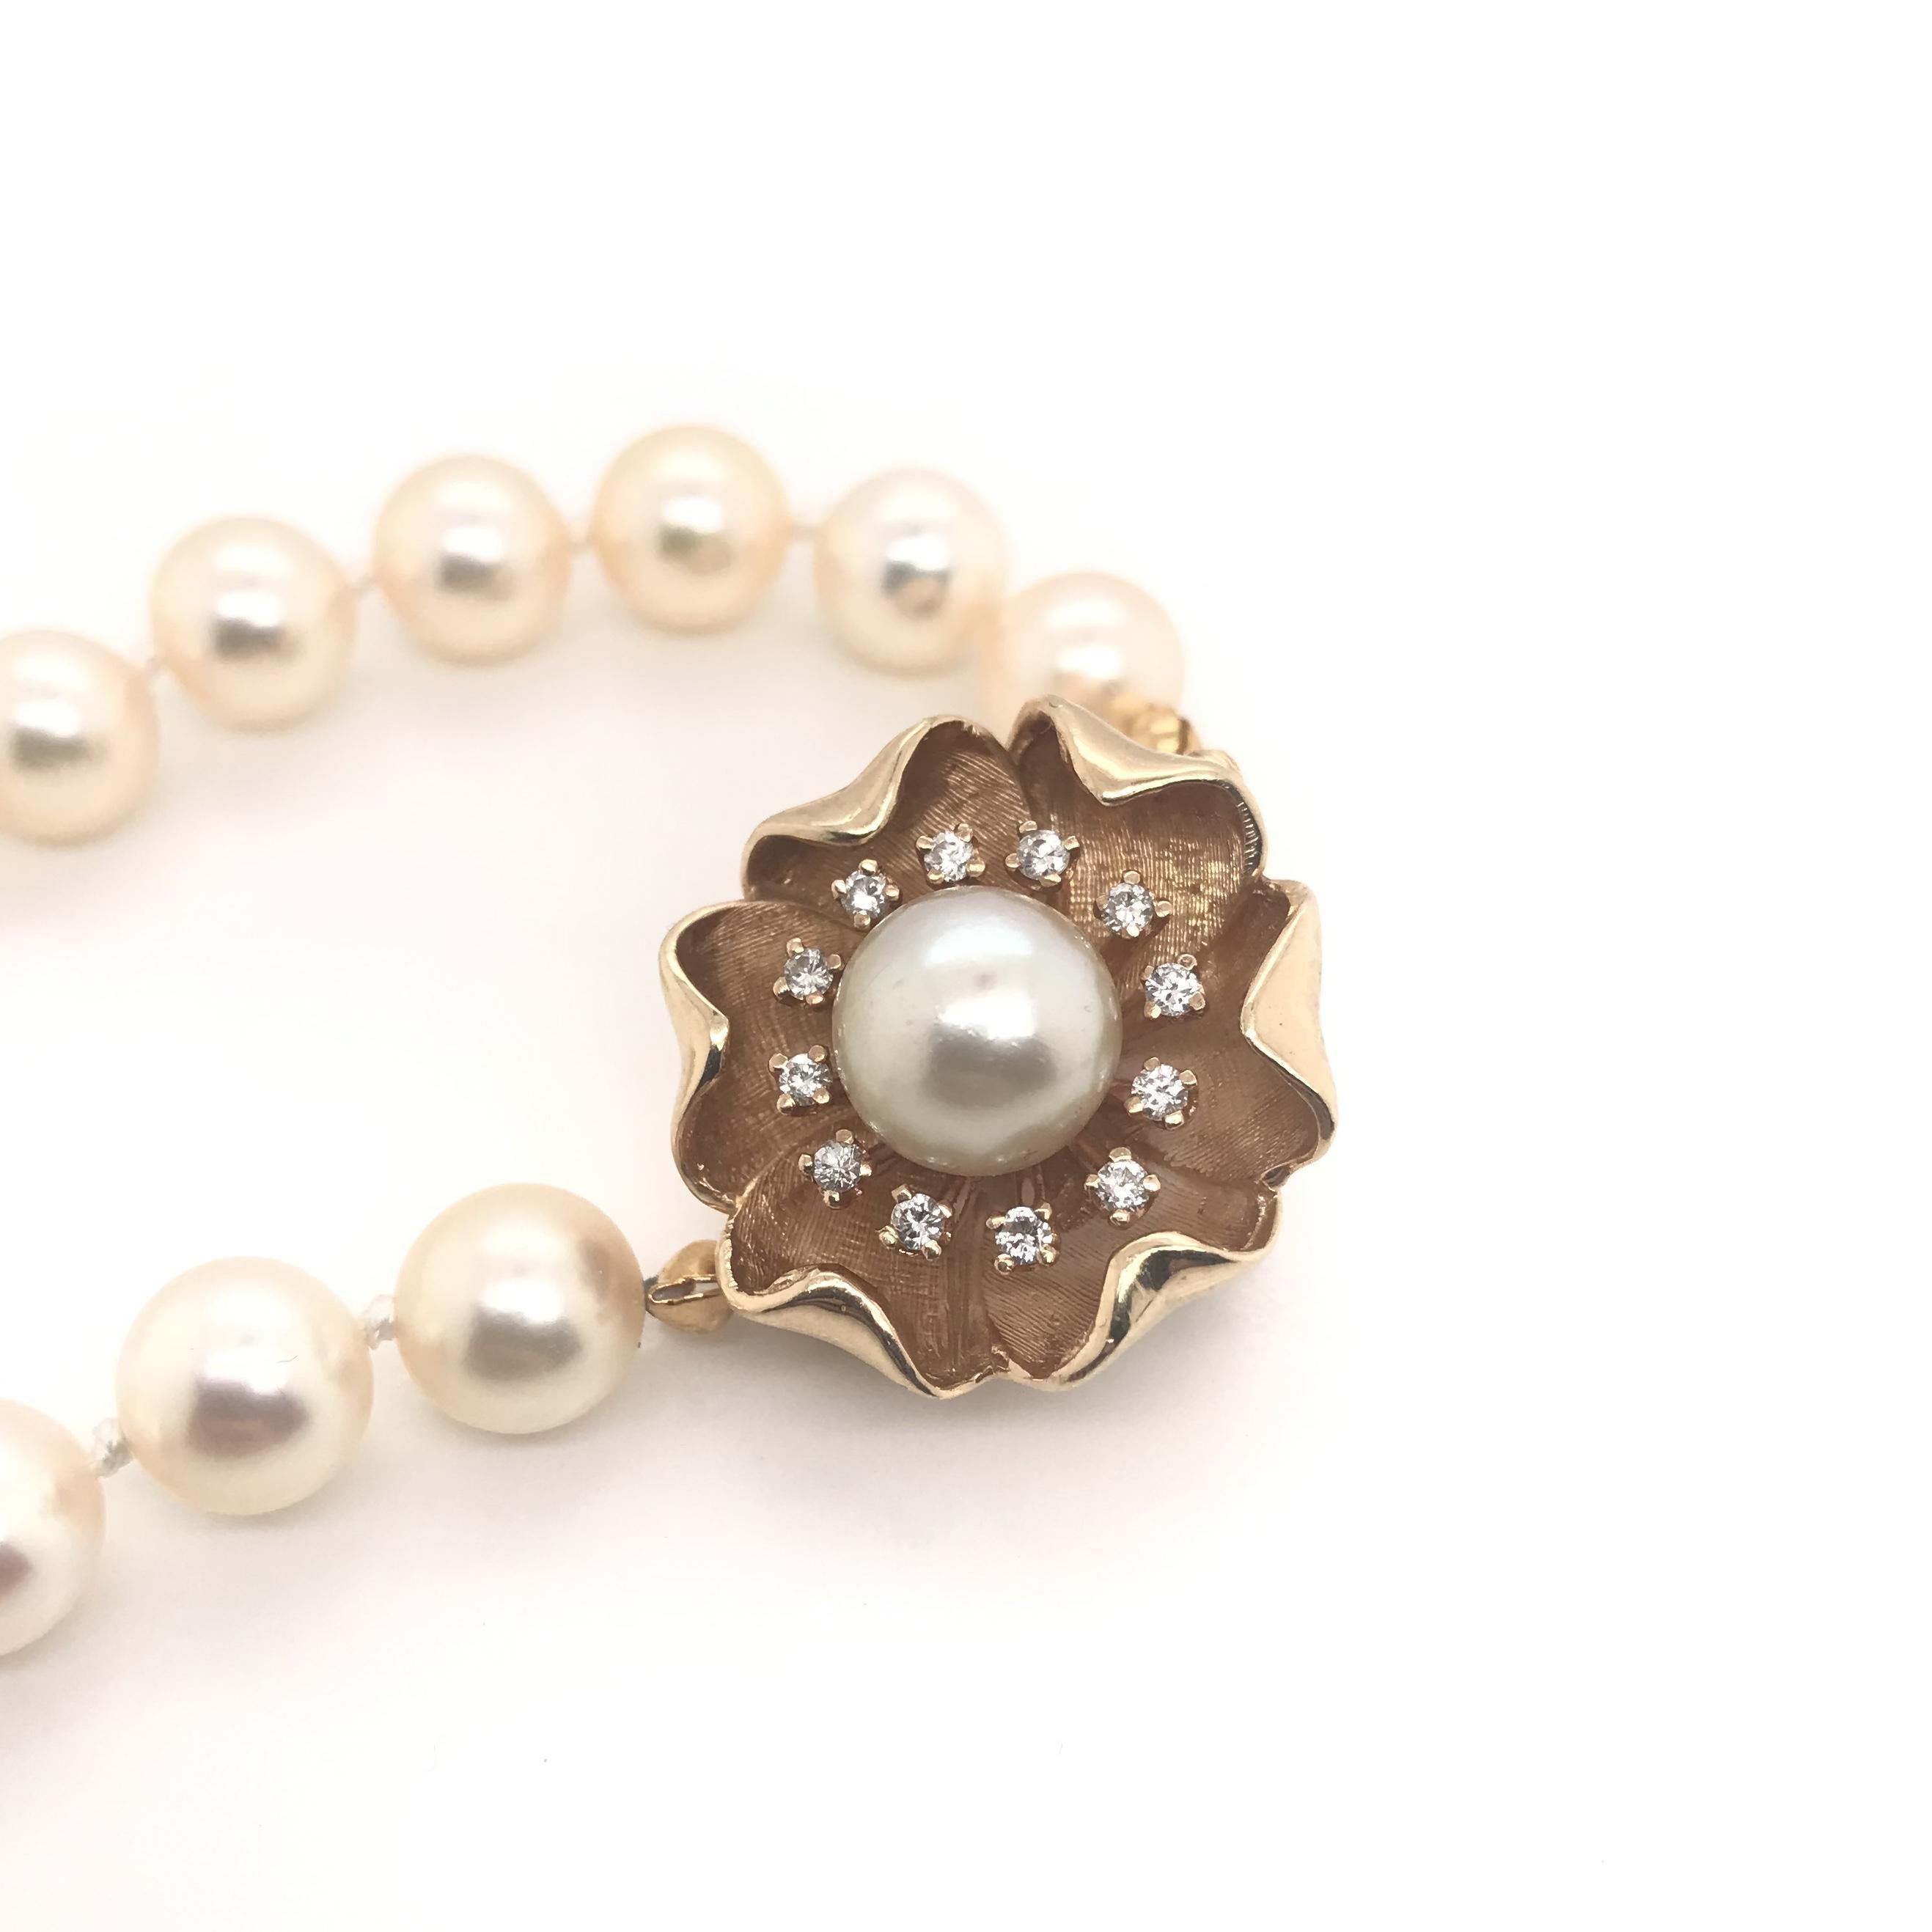 Round Cut Vintage Mid Century 7.5 Mm Pearl Necklace With Floral Diamond Clasp